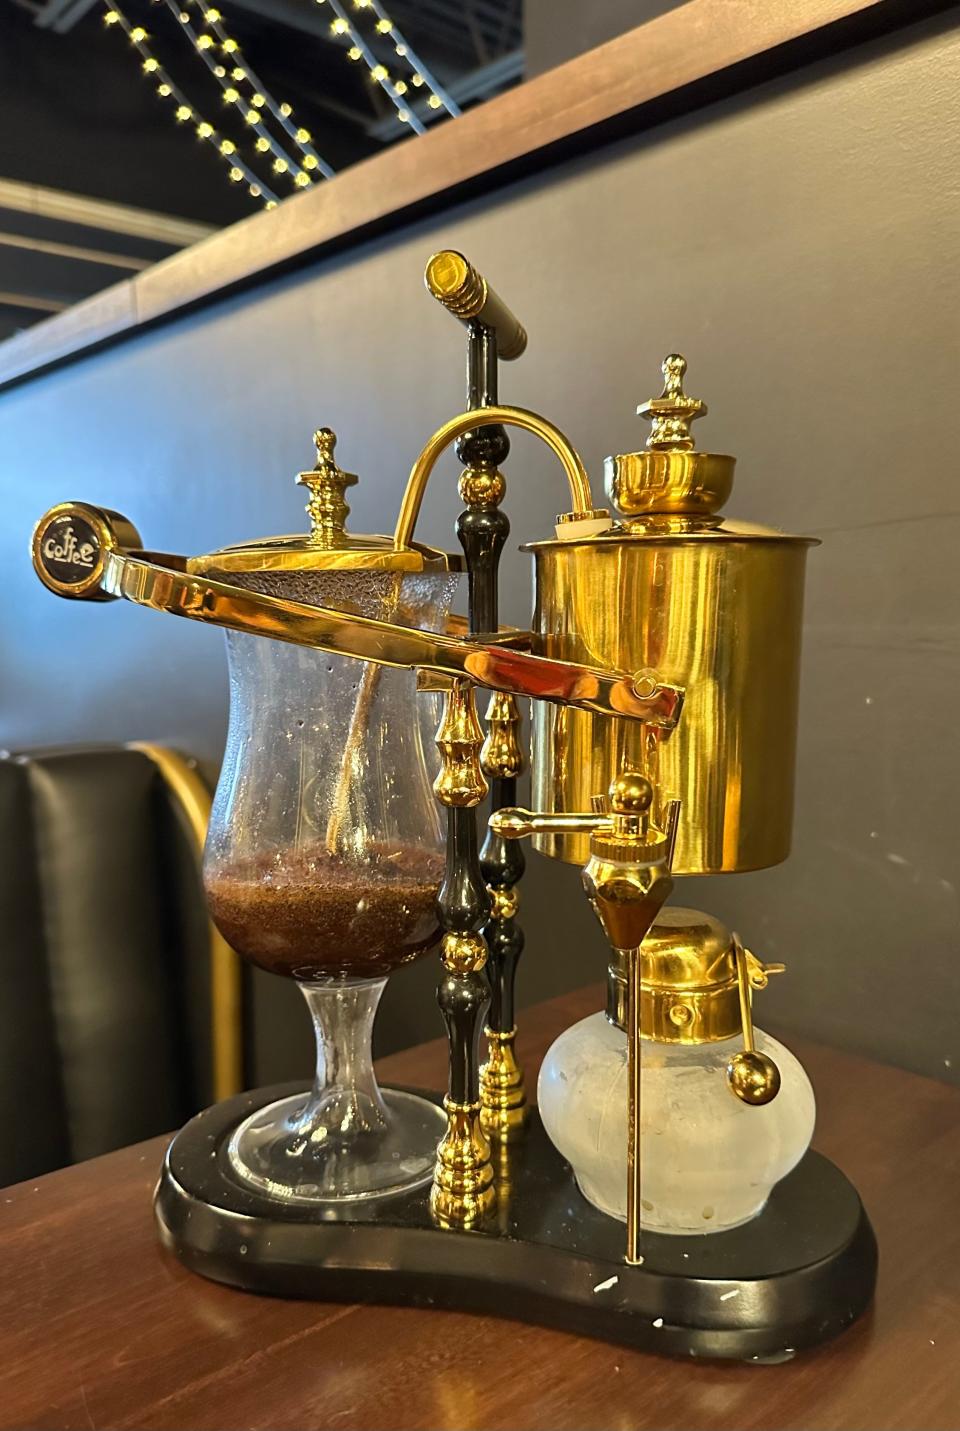 A Belgium Syphon coffee experience, tableside, is available to enjoy at Pioneer Coffee Co. in Massillon.